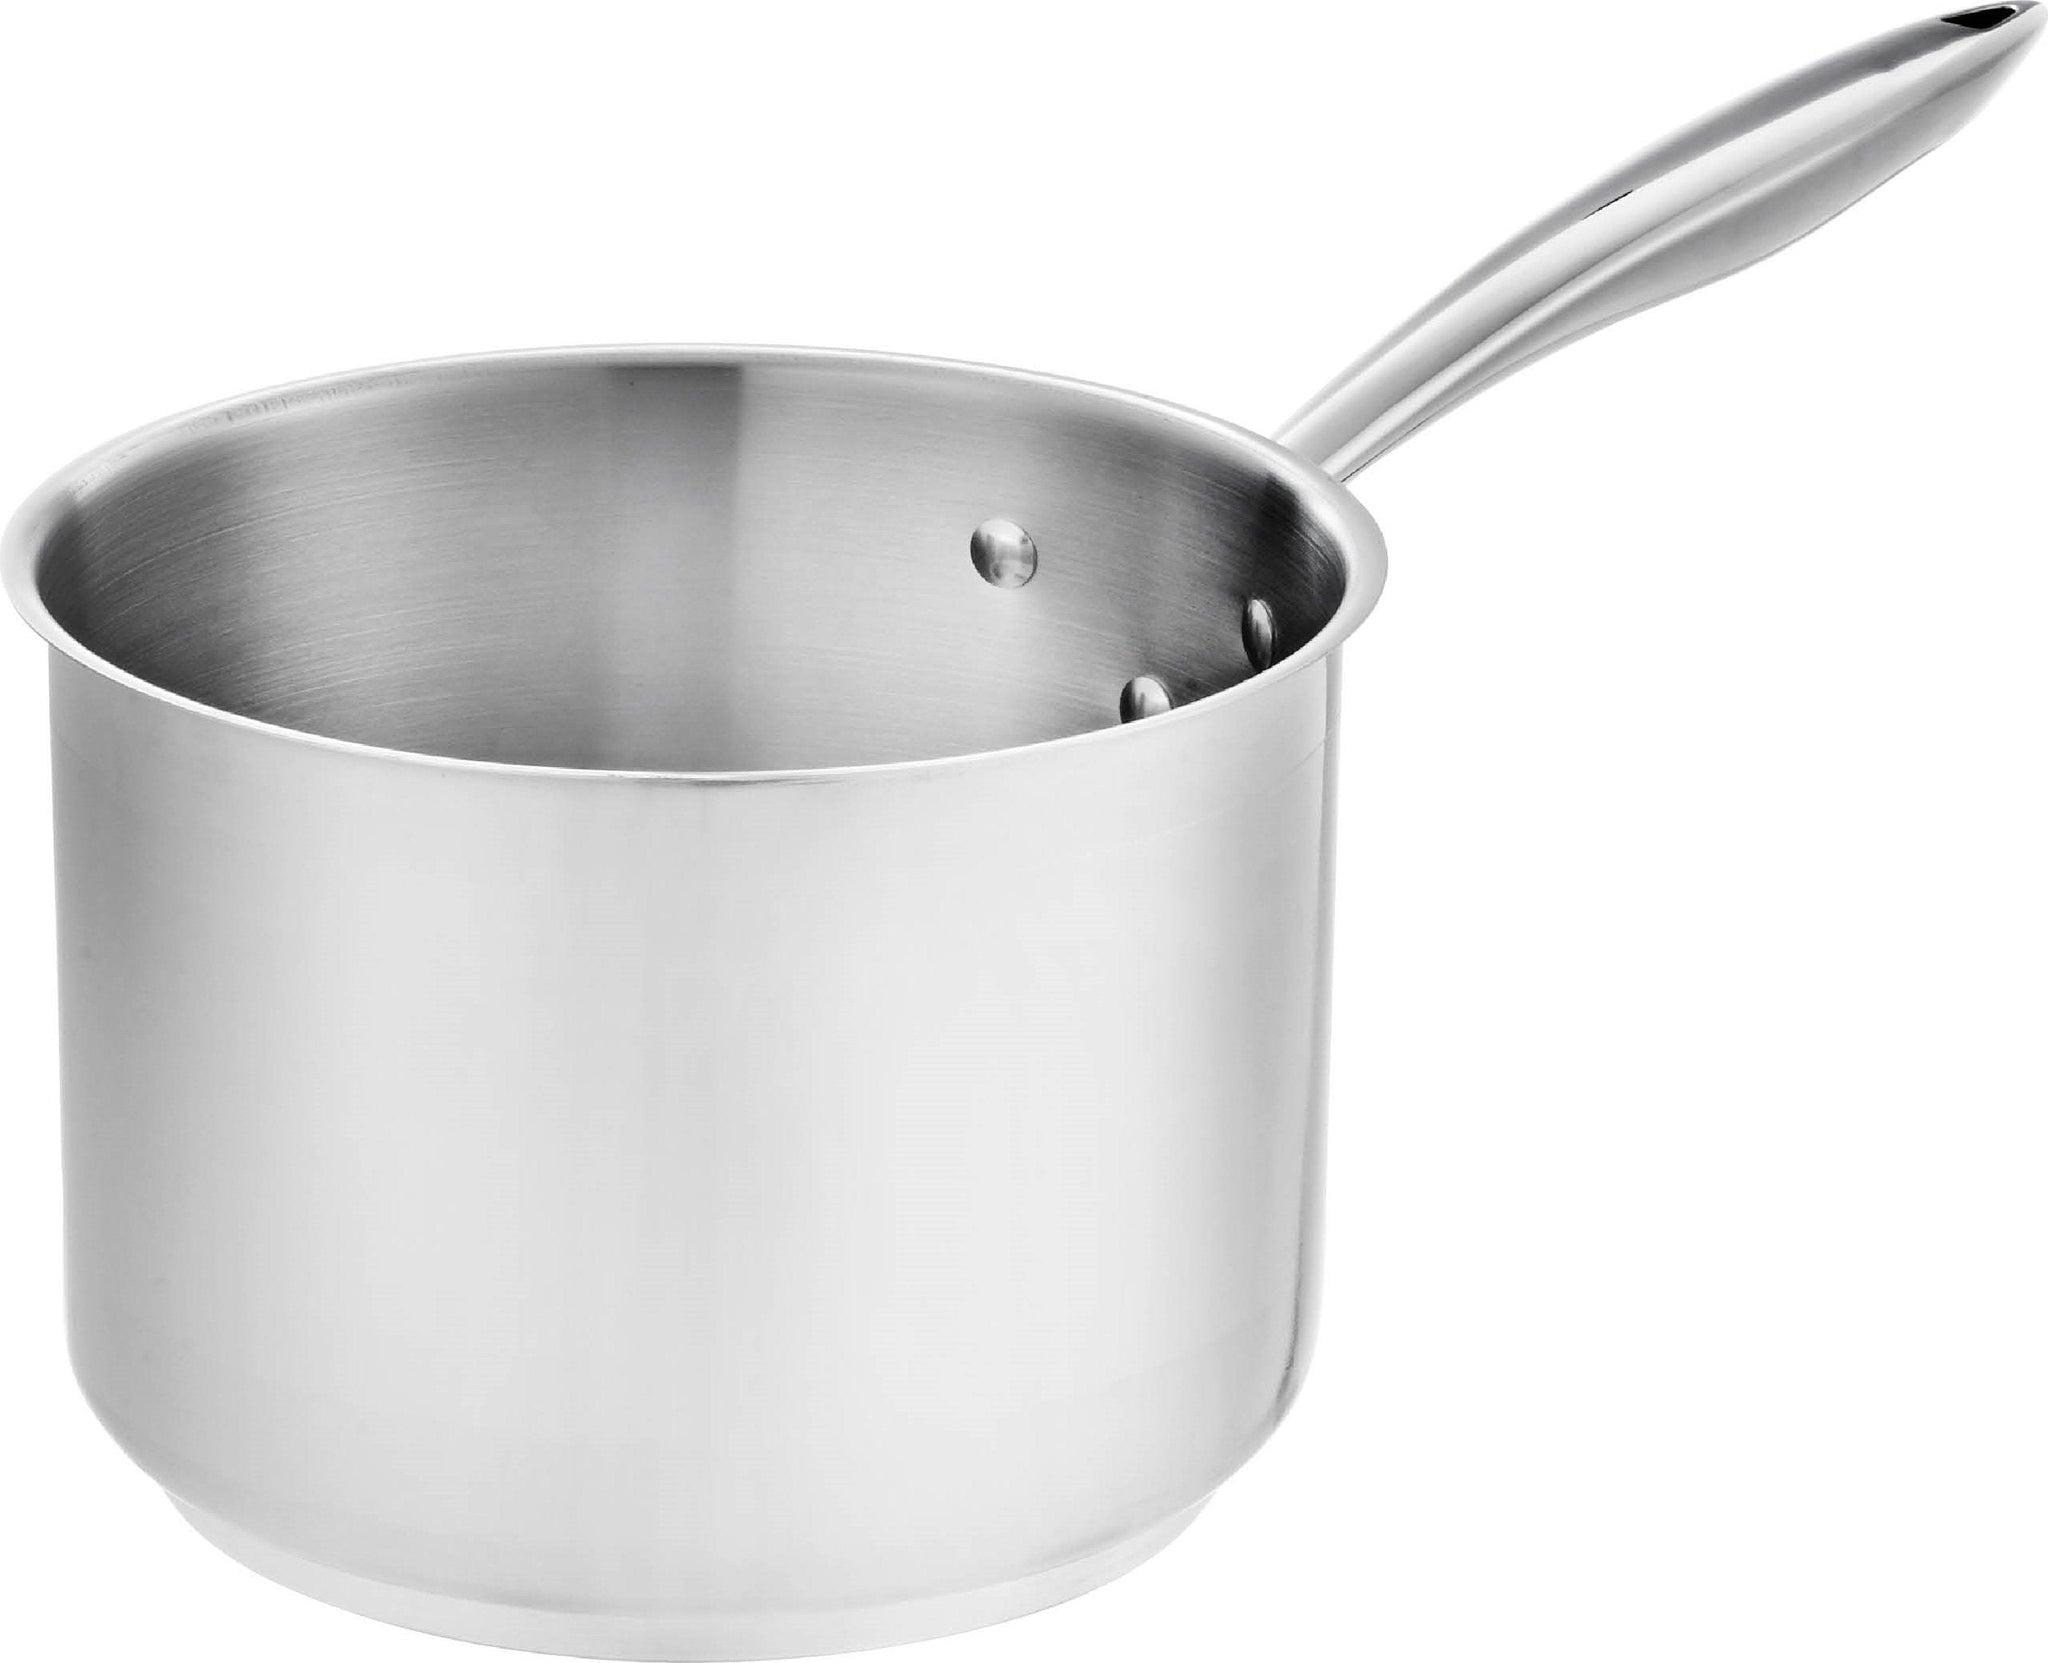 Thermalloy - 6 QT Stainless Steel Sauce Pan (Lid Not Included) - 5724036